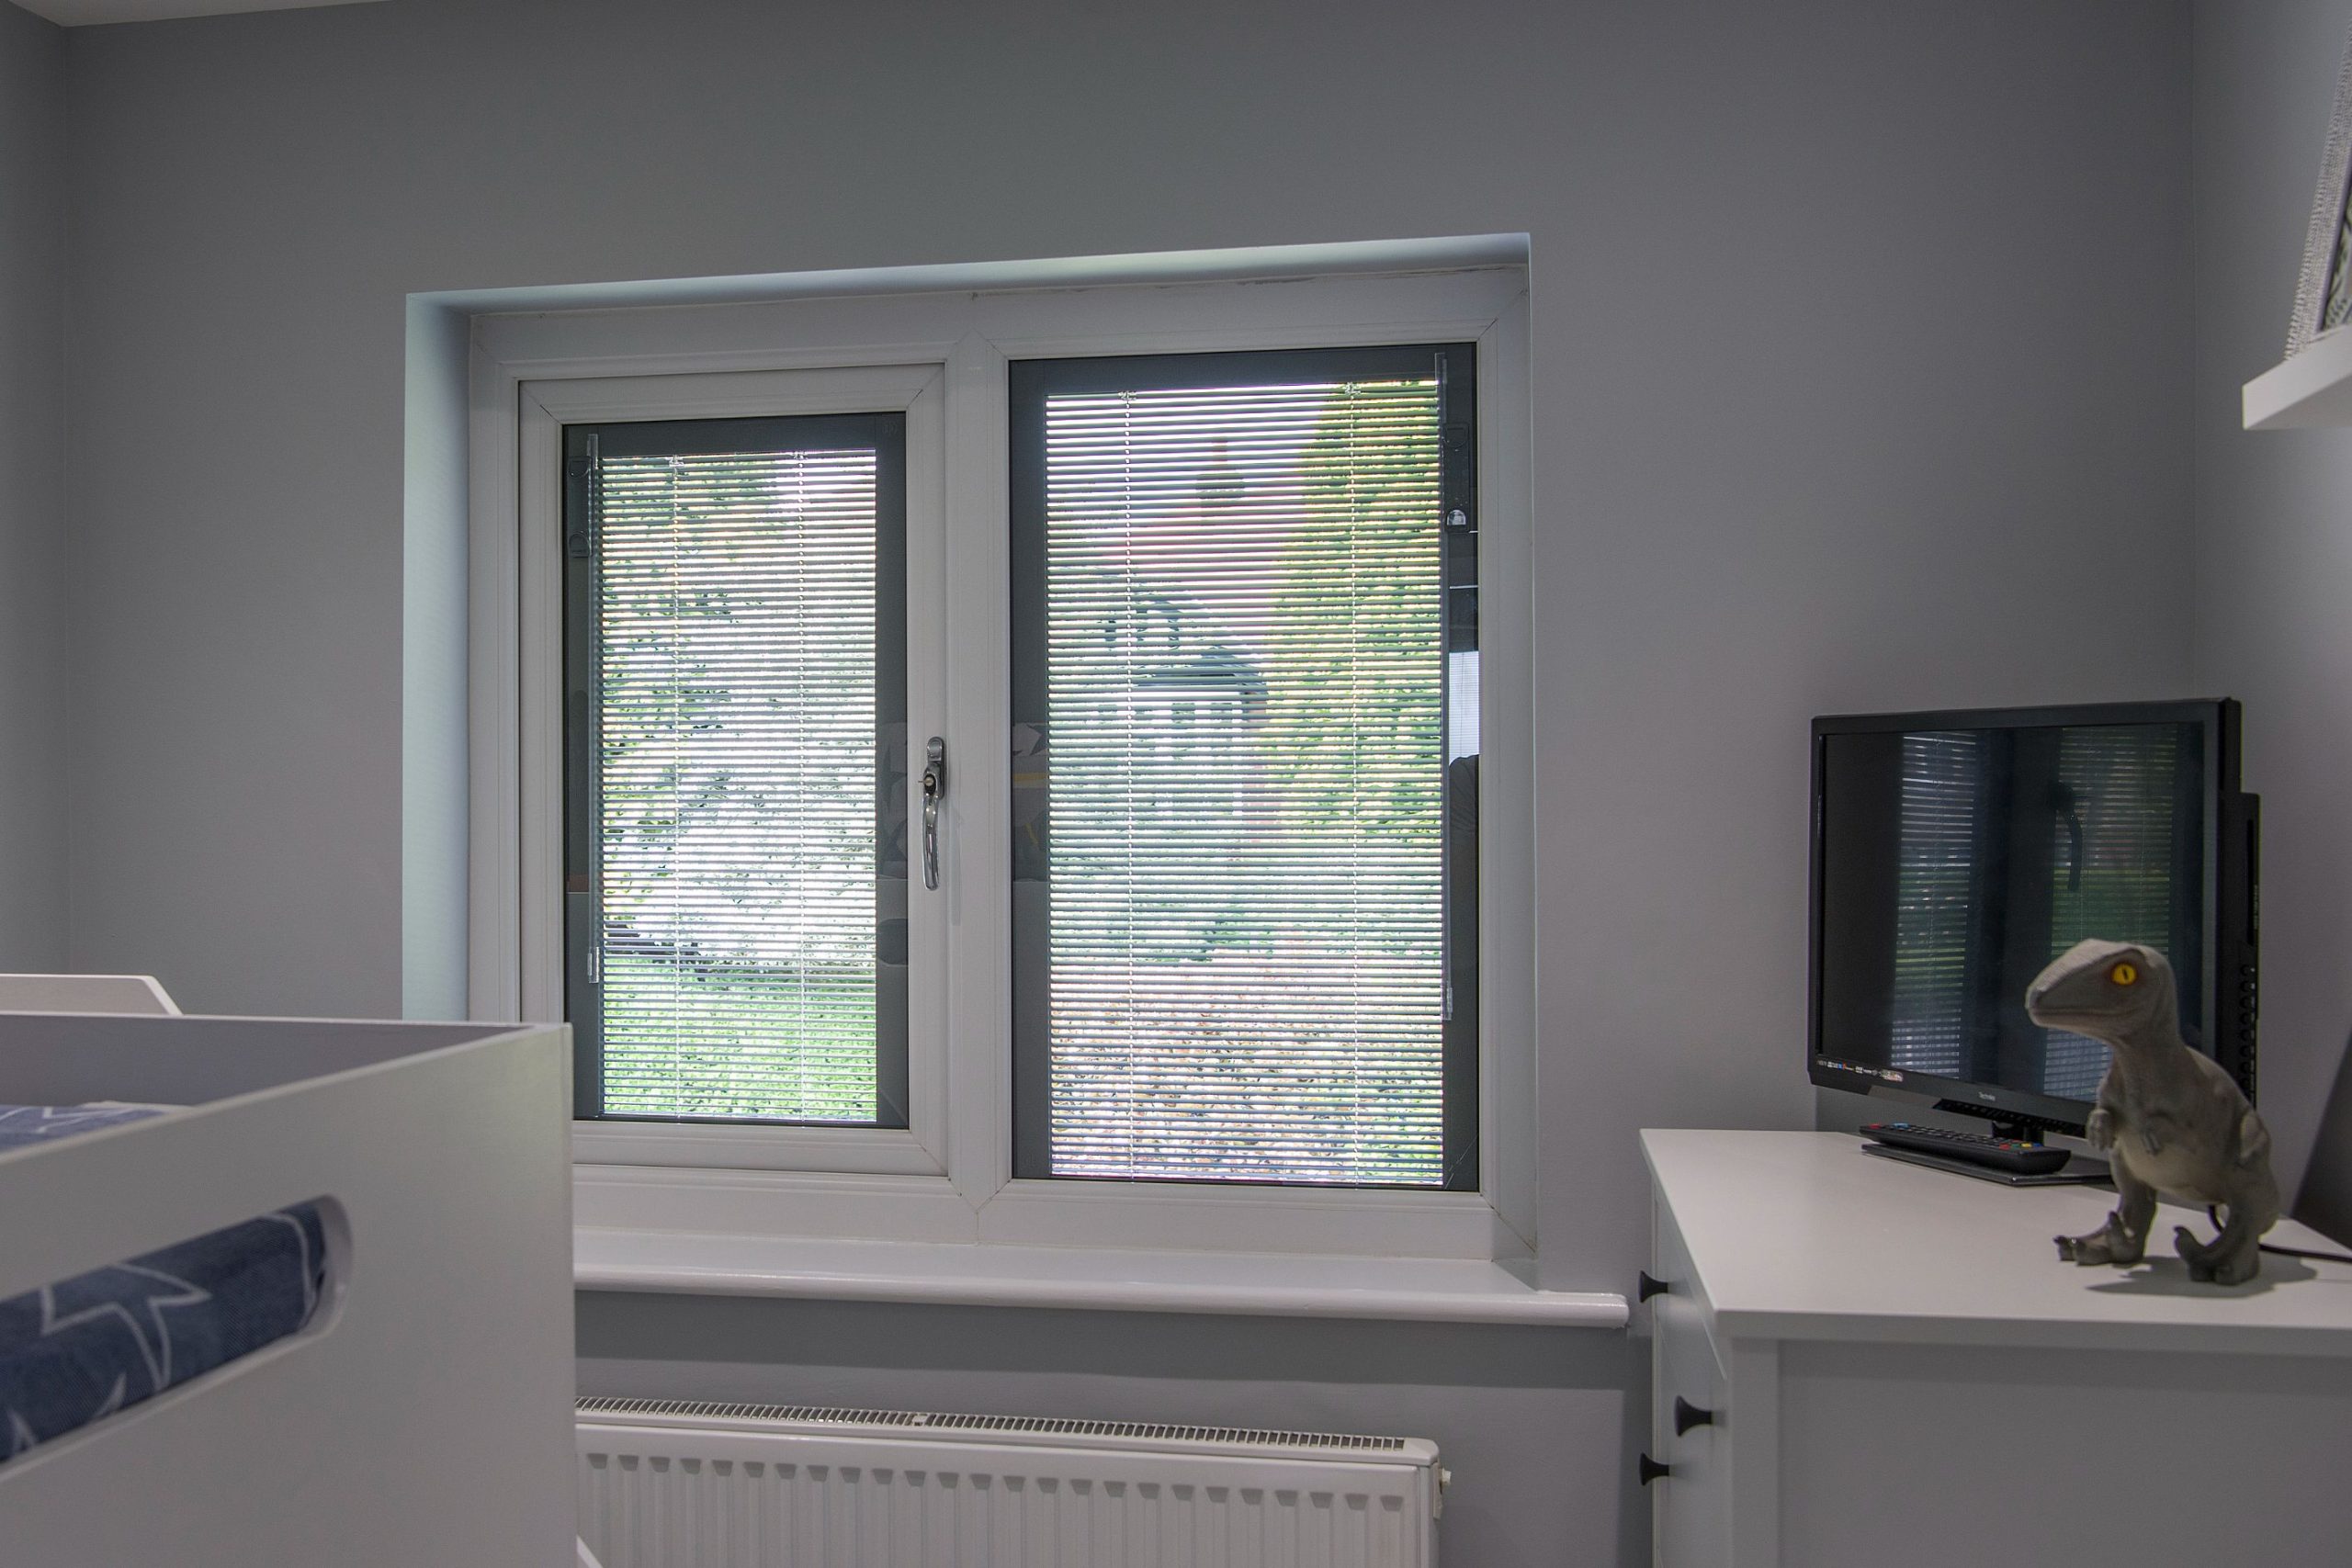 The SV+ integral blind offers symmetrical aesthetics with cordless magnetic slider control.